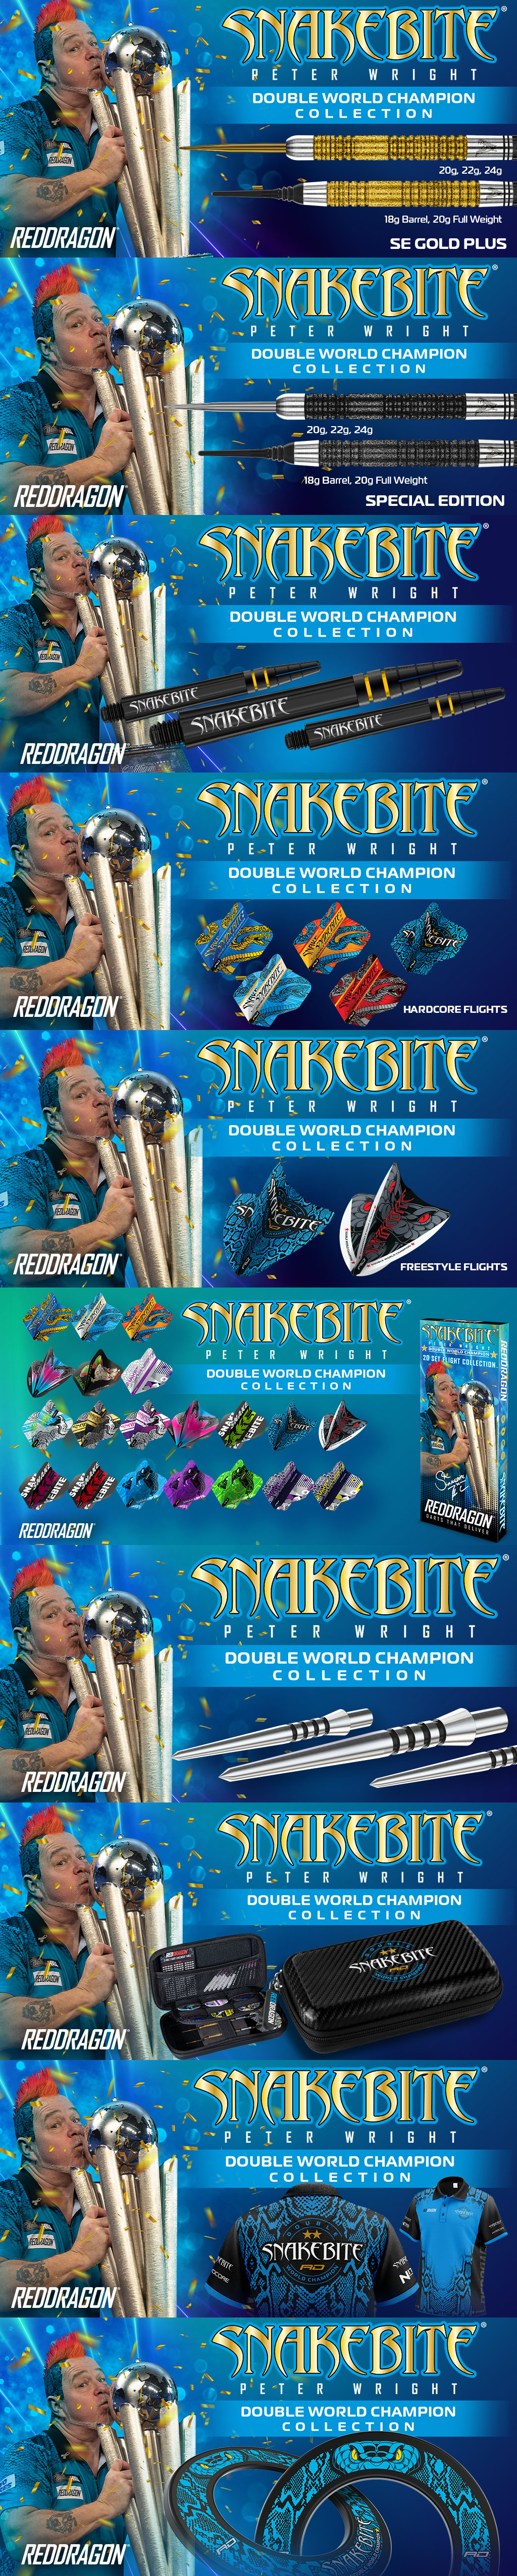 Red Dragon Dart 2022 Collection Launch 18.05.2022 neue Snakebite Double World Champion Collection, Peter Wright Double World Champion Special Edition Black, SE Gold Plus, Peter Wright Nitrotech Shaft, Dartshirt 2022